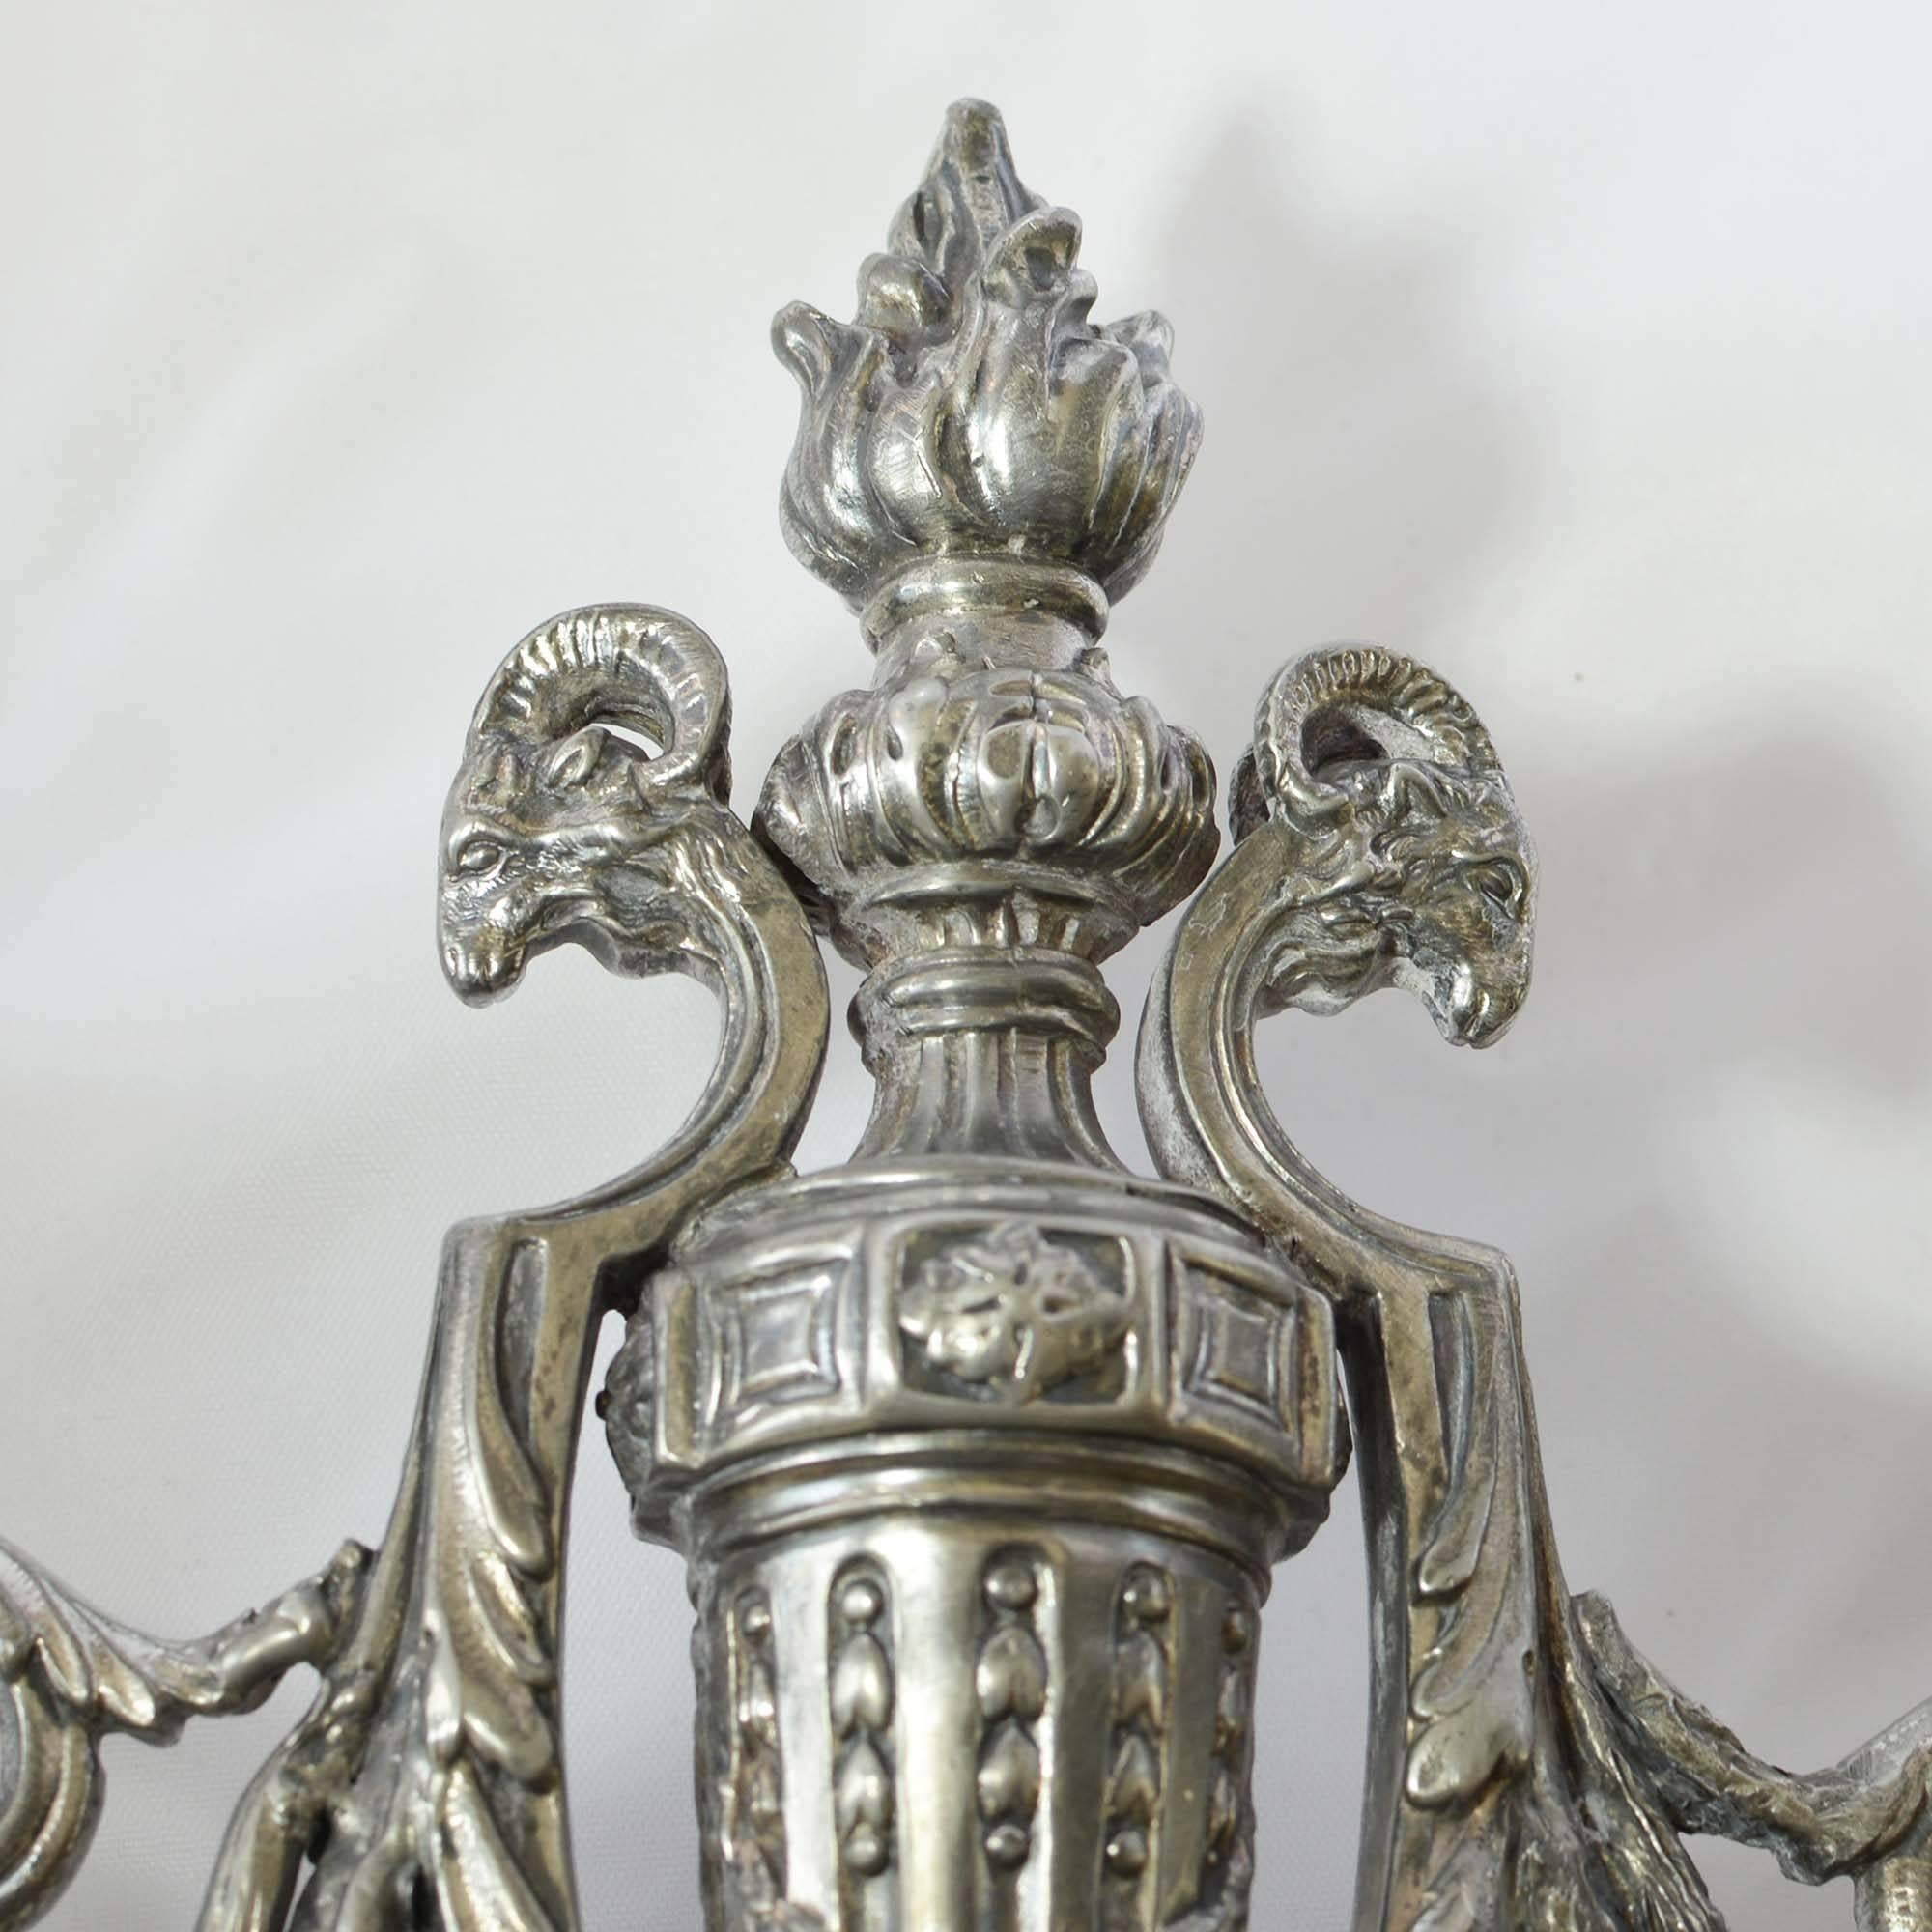 A pair of late 19th century silver plate candelabras by Victor Saglier of Paris, France. The pair of candelabras are beautifully detailed in design. These matching Art Nouveau candelabras feature figural flame finials, ram’s head accents on their